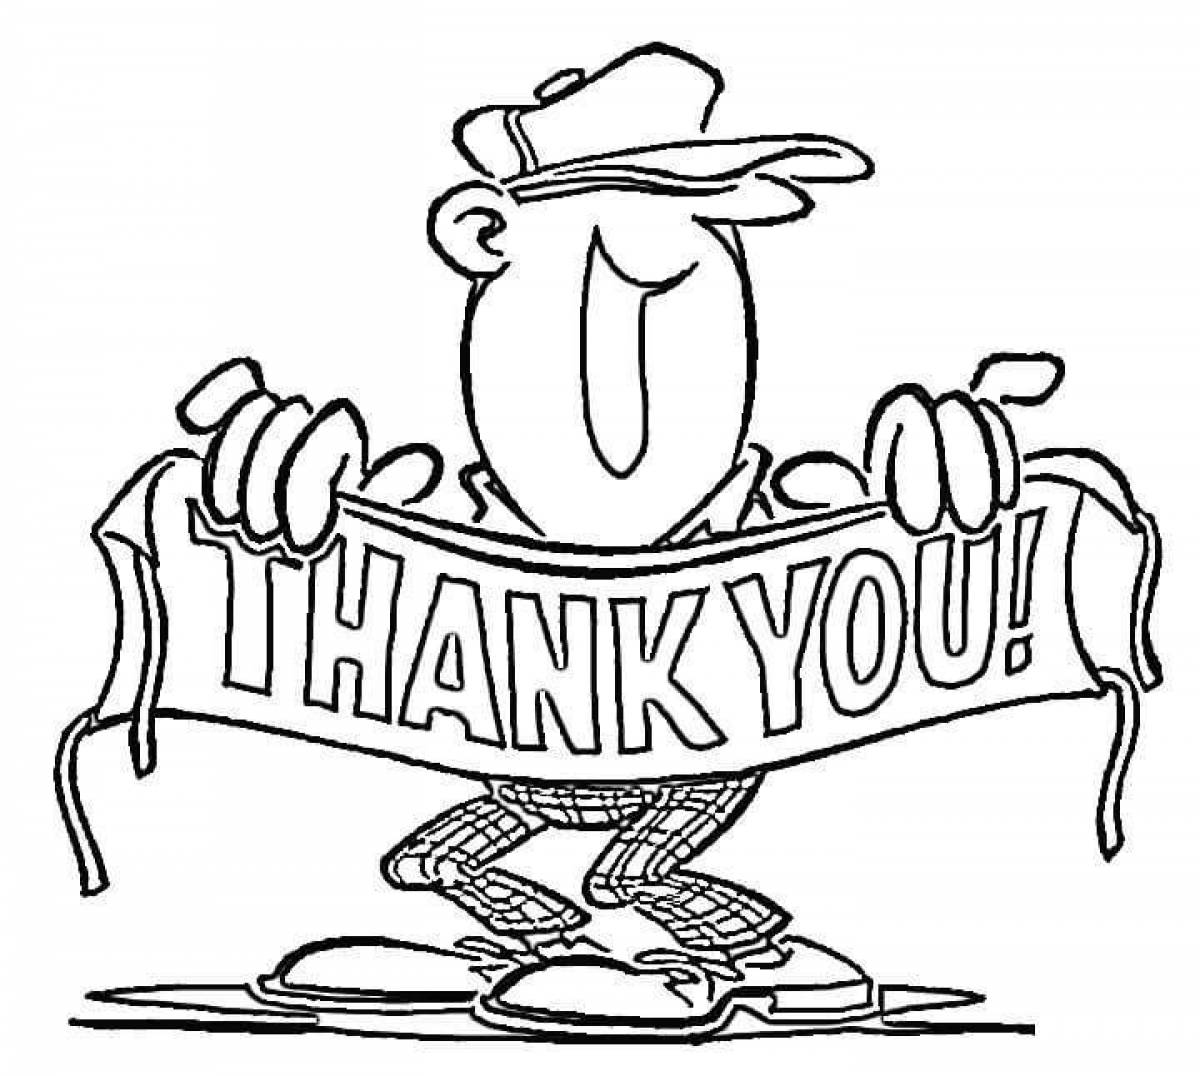 Color-fantastic thank you coloring page